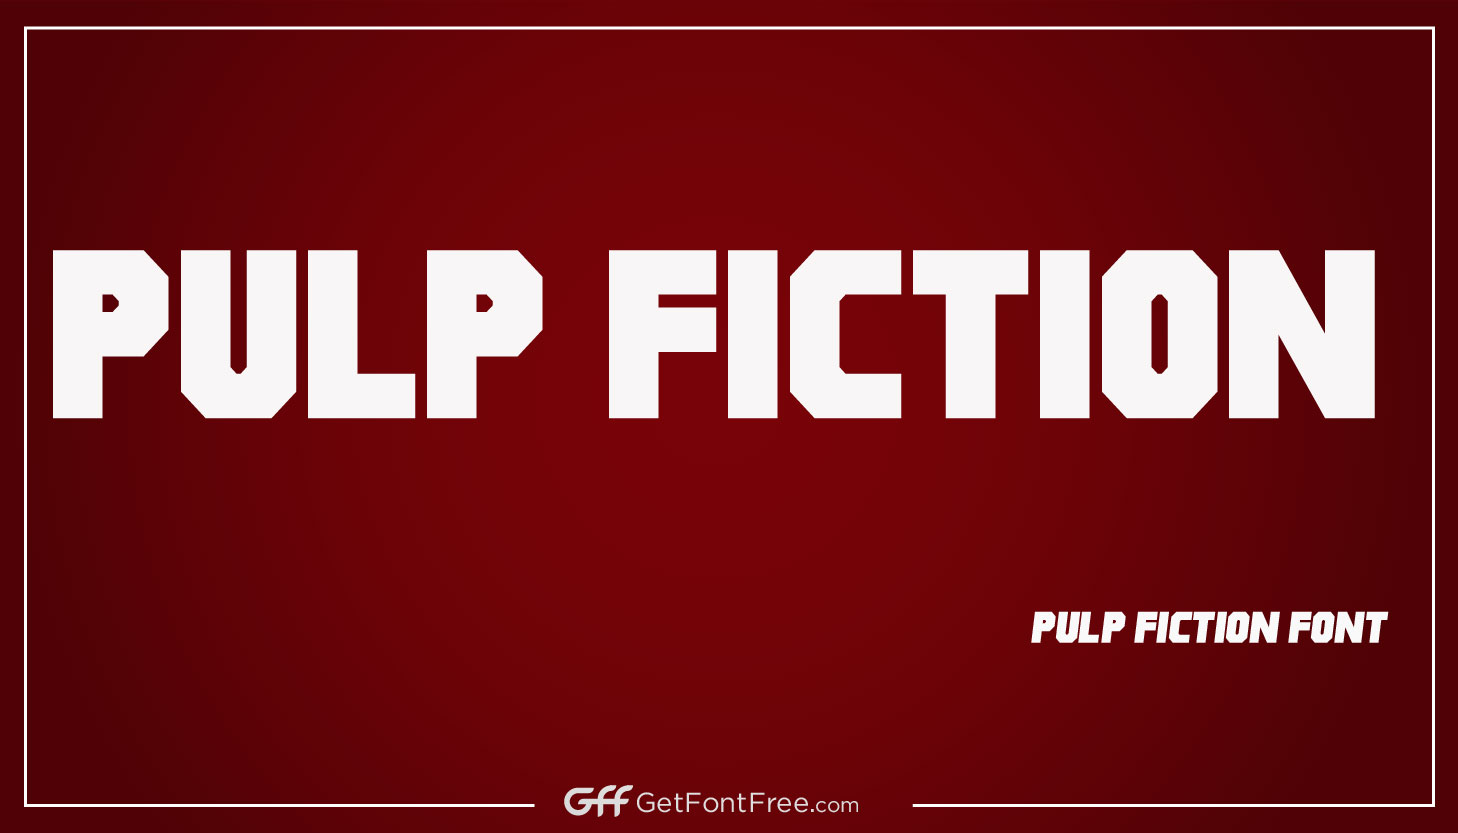 The font used in the title of the movie "Pulp Fiction" is called "Eurostile Bold Extended." It is a sans-serif typeface designed by Alessandro Butti in 1962 and has since become a widely popular font. It has been used in many other movies, TV shows, and print media, as well as on the web. This bold and modern font adds a unique and stylish touch to the title of the classic film. The characters are strong and striking, making it an excellent choice for a movie with such a memorable and iconic title.